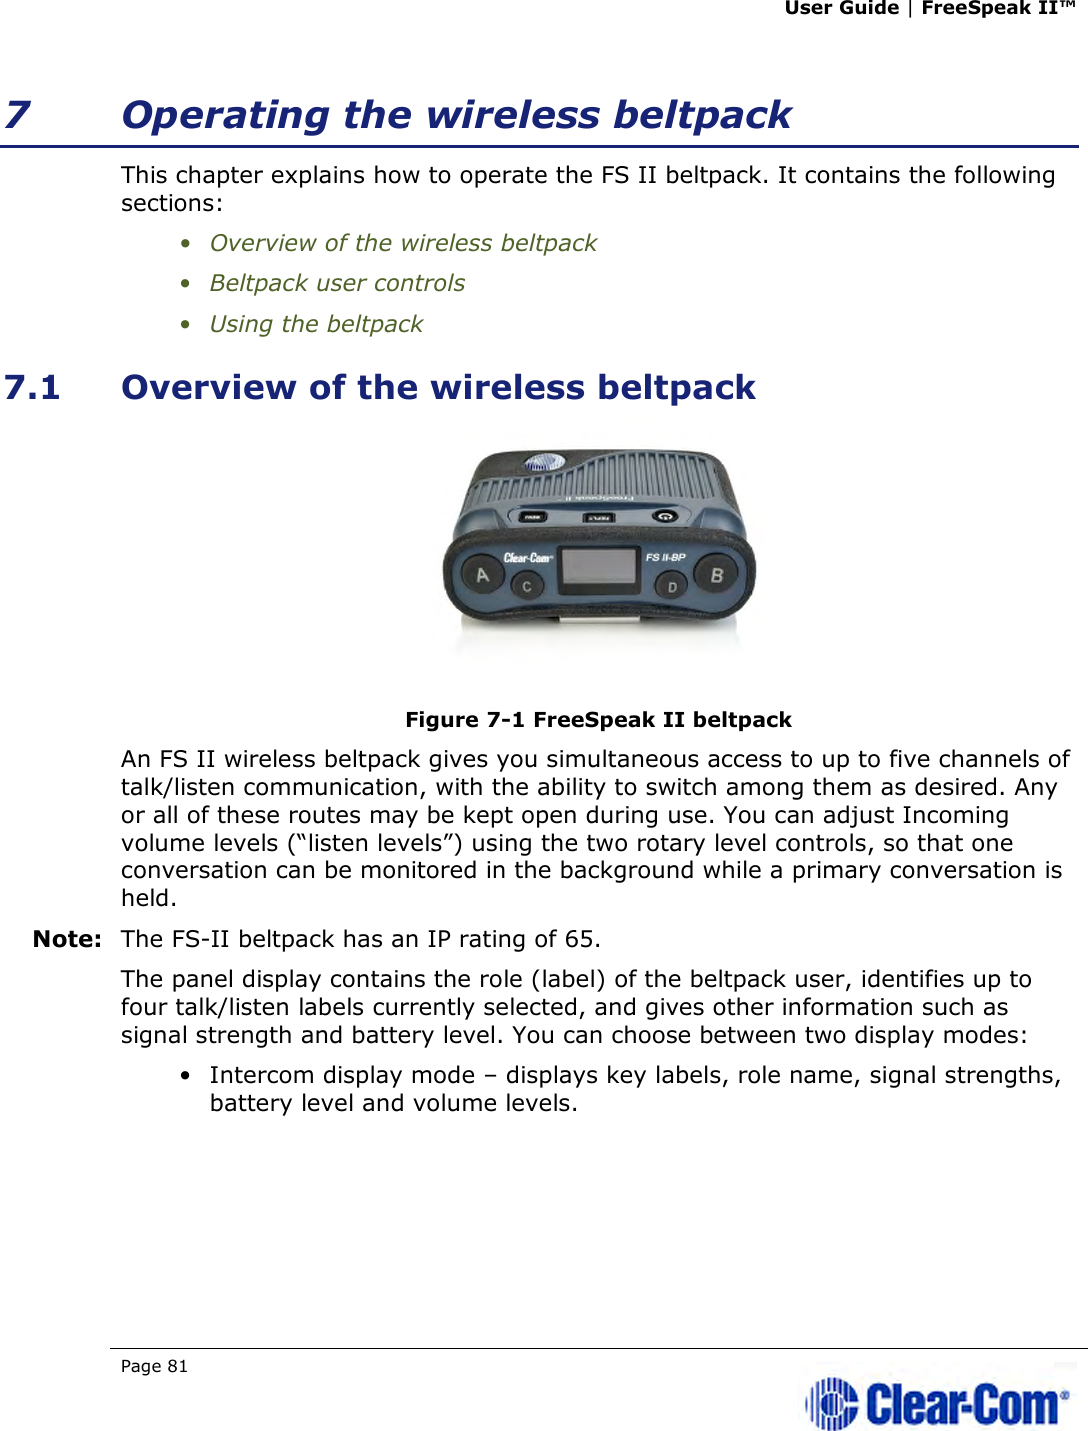 User Guide | FreeSpeak II™  Page 81   7 Operating the wireless beltpack This chapter explains how to operate the FS II beltpack. It contains the following sections: • Overview of the wireless beltpack • Beltpack user controls • Using the beltpack 7.1 Overview of the wireless beltpack  Figure 7-1 FreeSpeak II beltpack An FS II wireless beltpack gives you simultaneous access to up to five channels of talk/listen communication, with the ability to switch among them as desired. Any or all of these routes may be kept open during use. You can adjust Incoming volume levels (“listen levels”) using the two rotary level controls, so that one conversation can be monitored in the background while a primary conversation is held.  Note: The FS-II beltpack has an IP rating of 65. The panel display contains the role (label) of the beltpack user, identifies up to four talk/listen labels currently selected, and gives other information such as signal strength and battery level. You can choose between two display modes: • Intercom display mode – displays key labels, role name, signal strengths, battery level and volume levels. 